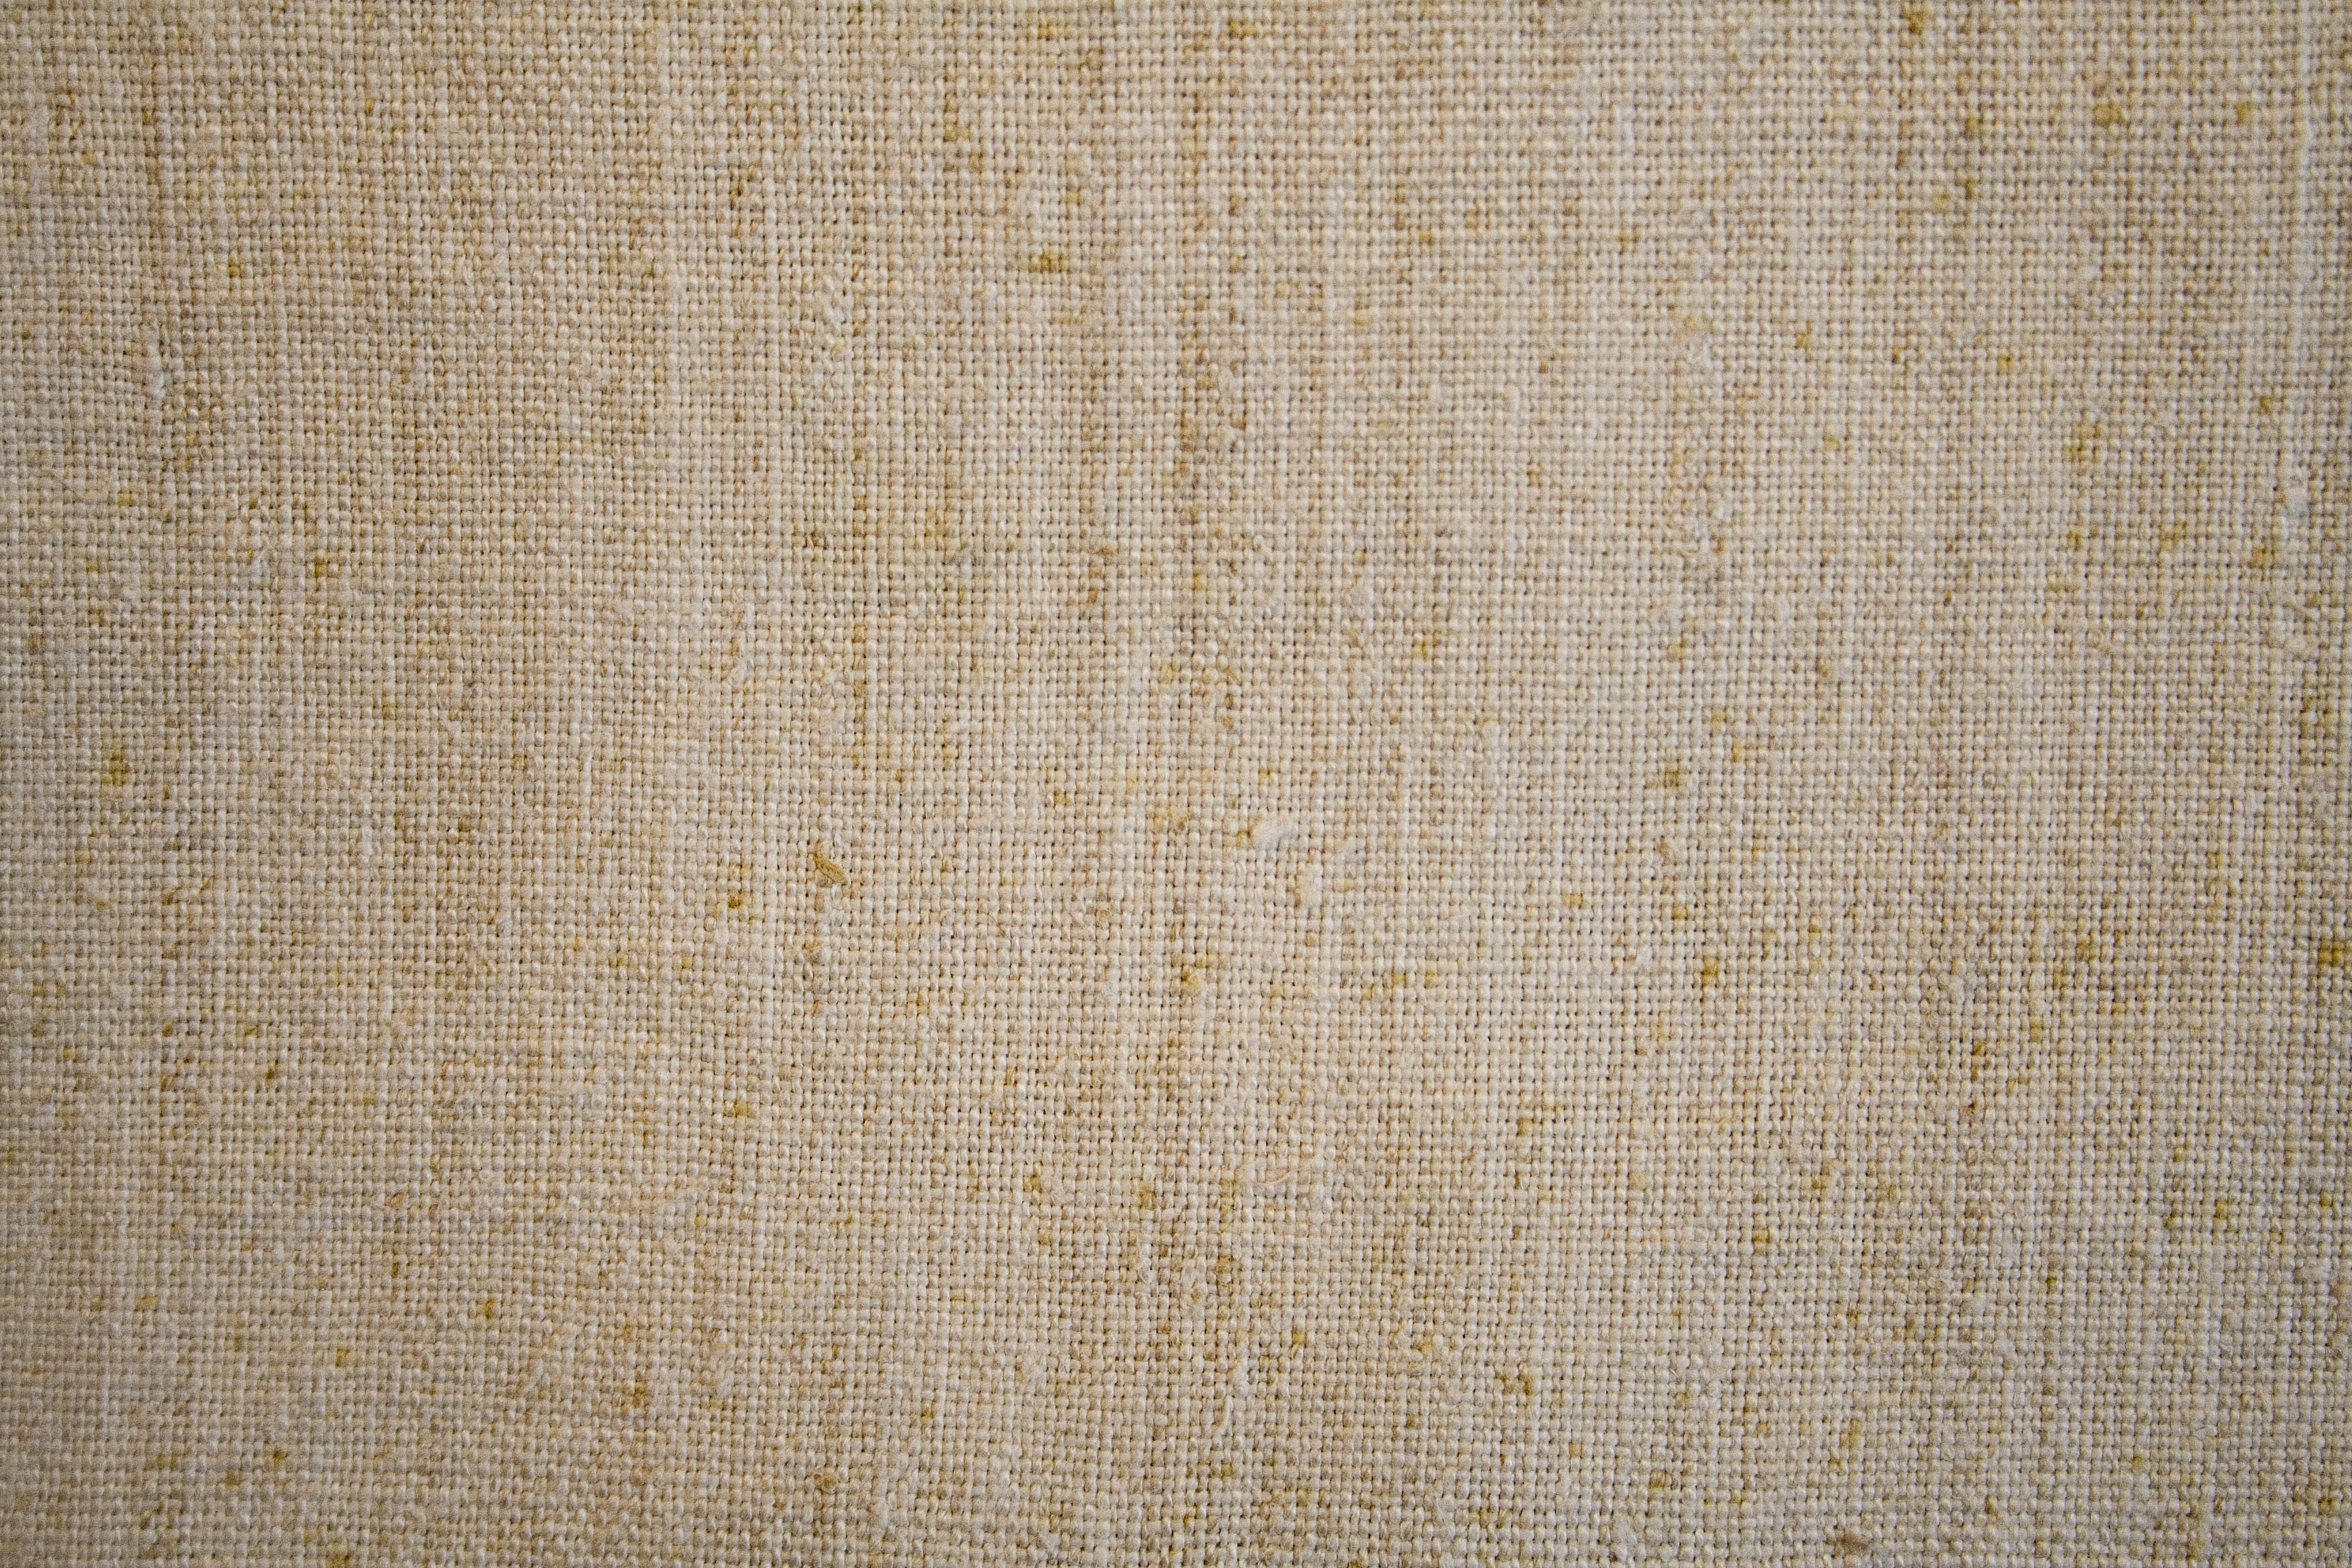 Linen Texture | Free All Download | Cuzimage